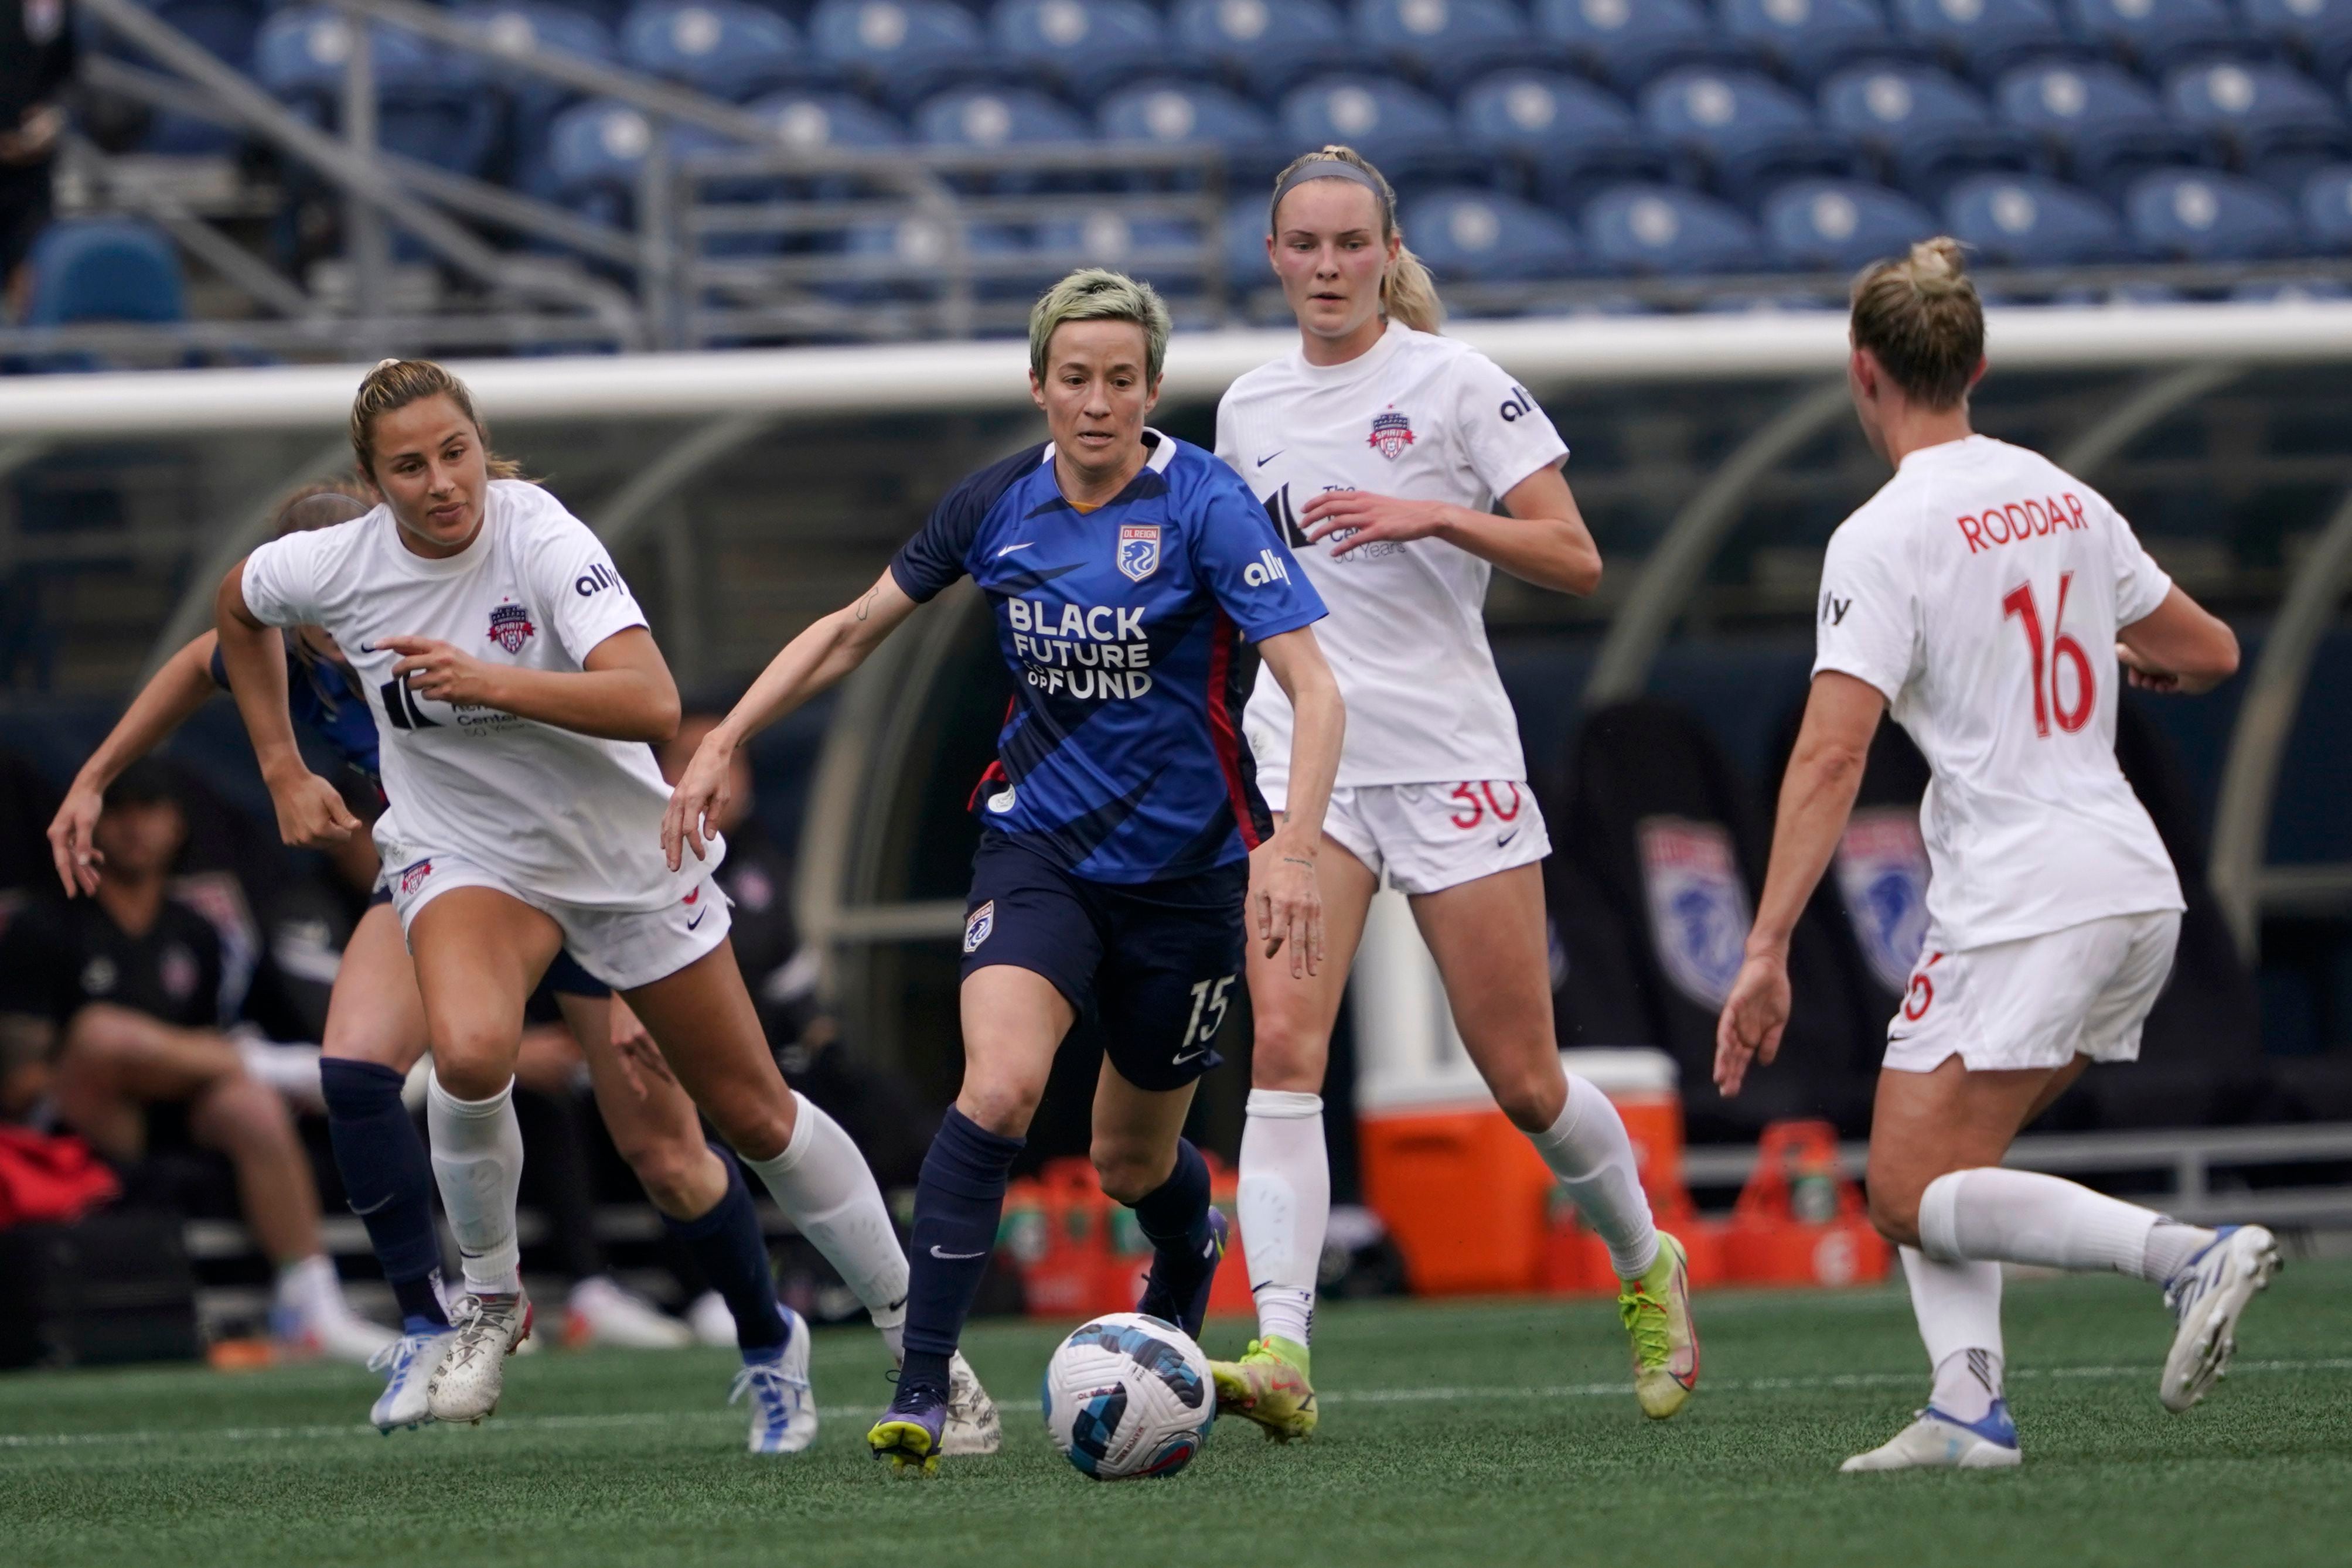 Players react joyfully to news of new women's pro league - SoccerWire